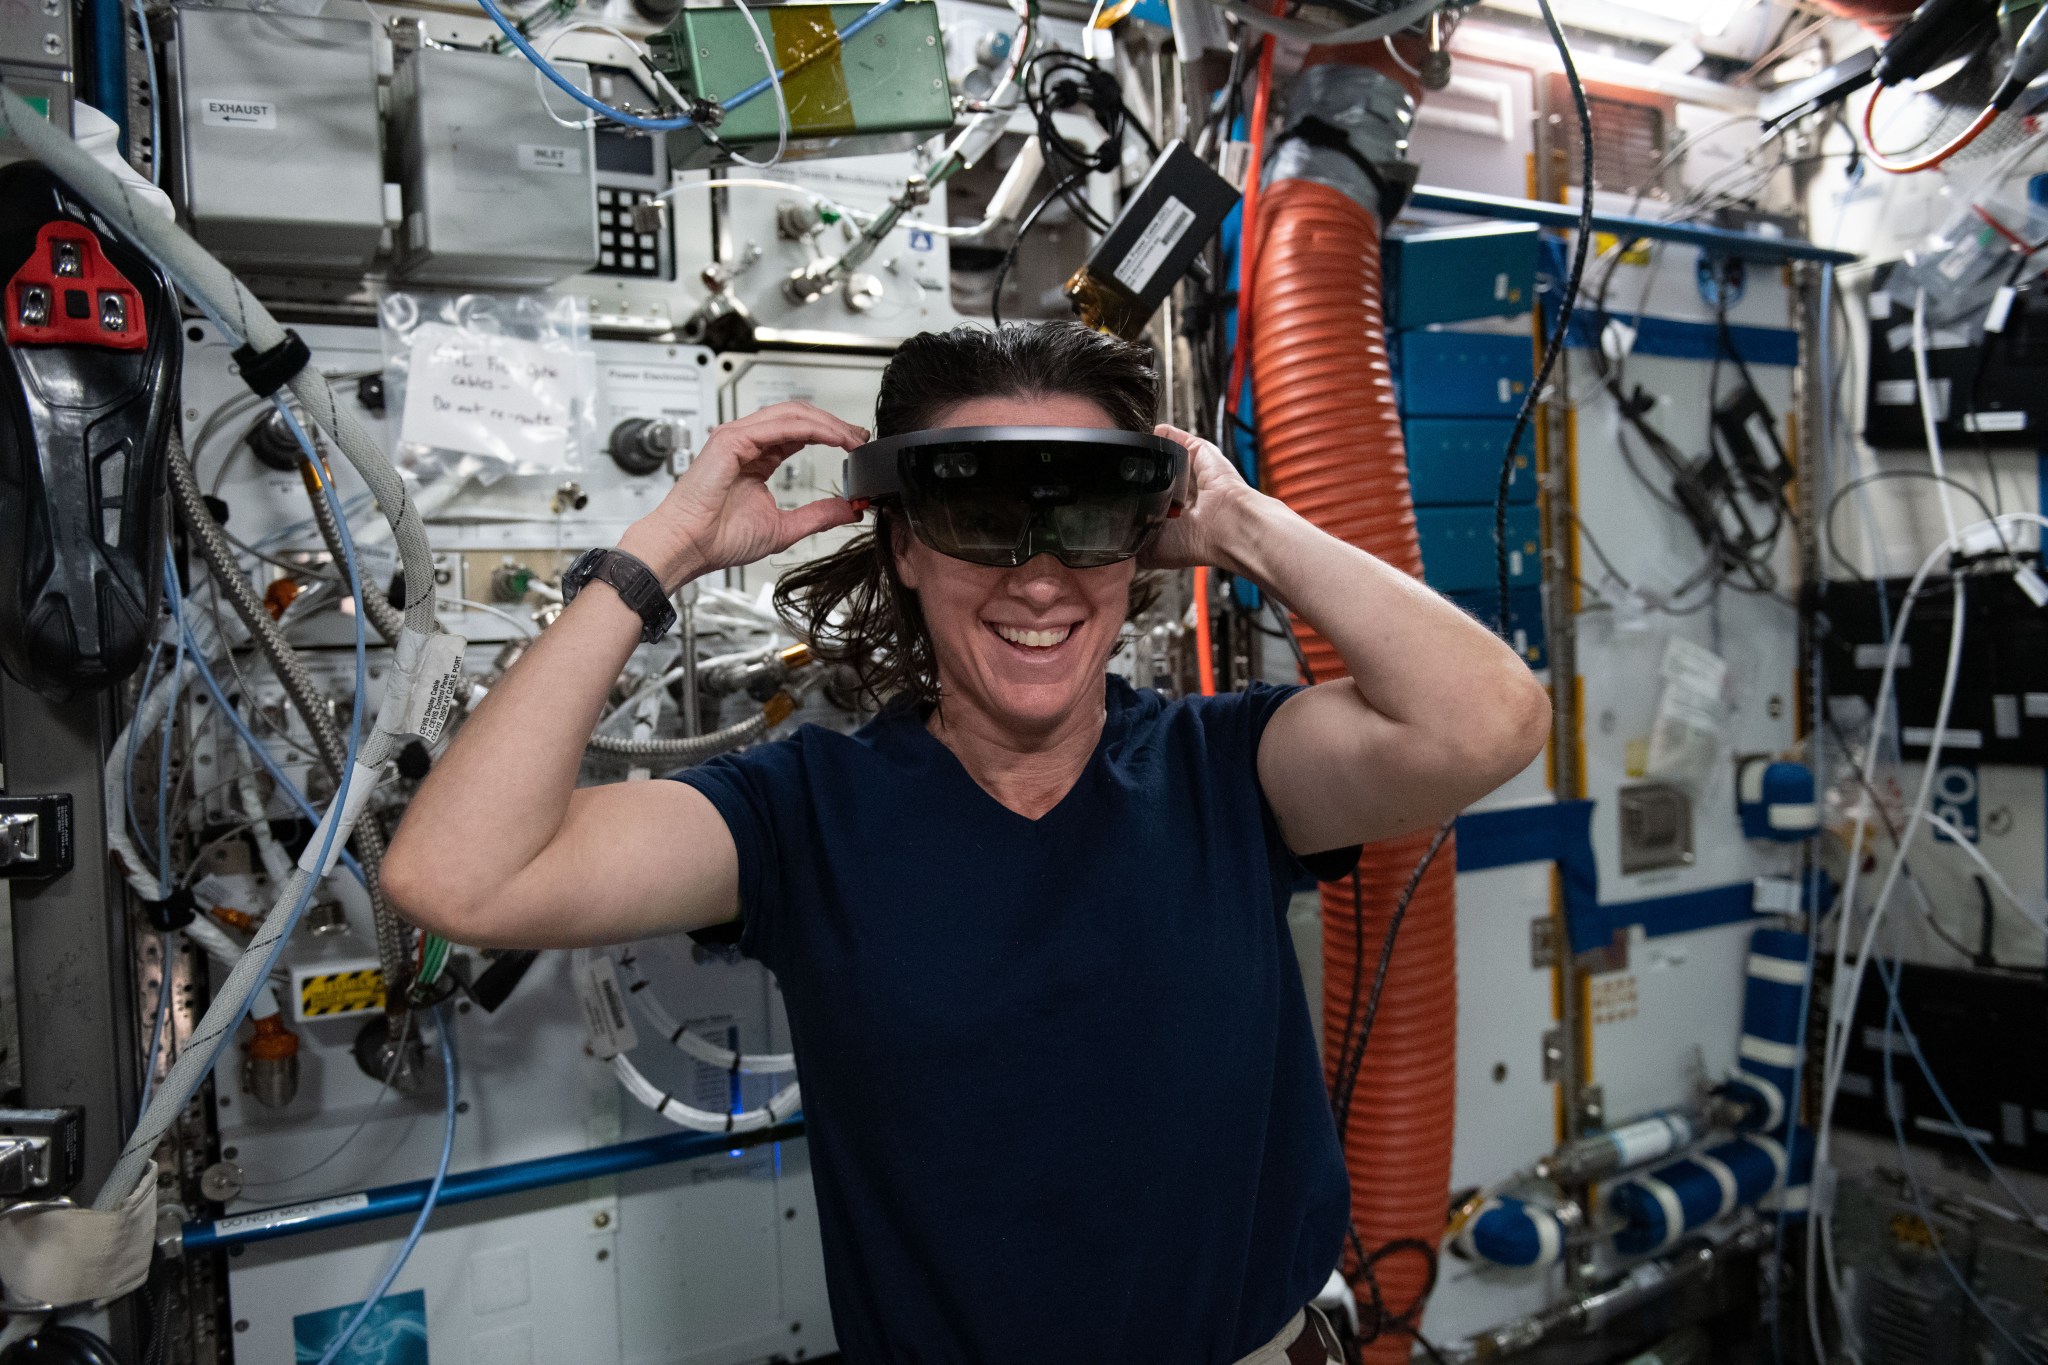 NASA Astronaut Megan McArthur dons a Microsoft HoloLens, a mixed reality (or augmented reality) headset, which allows her to see both the spacearound her as well as digital displays in her field of view.